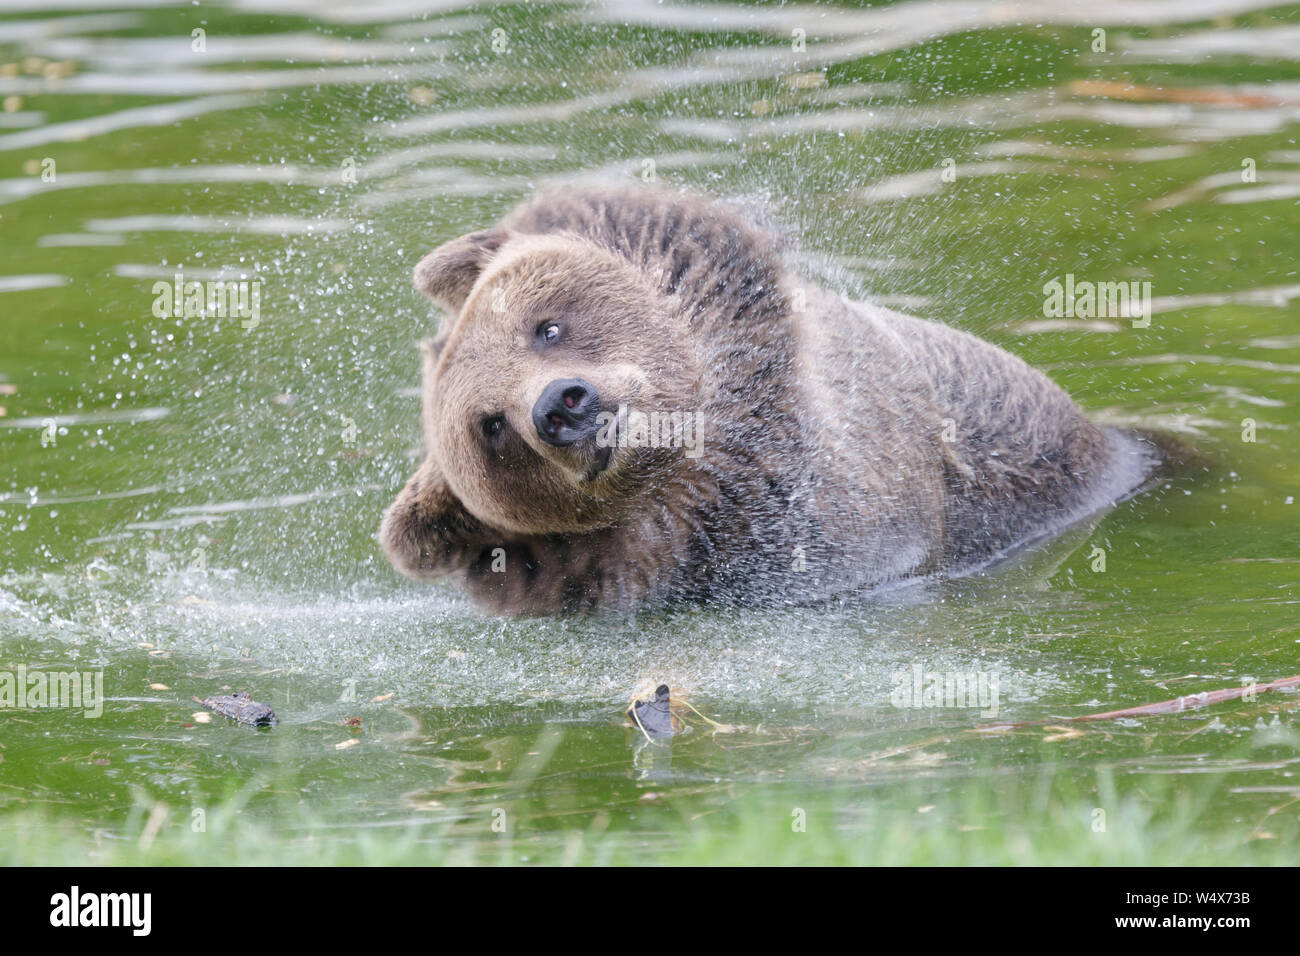 ZSL Whipsnade Zoo, Bedfordshire. 25th July 2019. UK Weather: Animals splash around in the water to cool down at ZSL Whipsnade Zoo.Record breaking heatwave, with temperatures of up to 39 degrees have been recorded across the UK.  European brown bear cools off in the pond at ZSL Whipsnade Zoo, UK Credit: Chris Aubrey/Alamy Live News Stock Photo